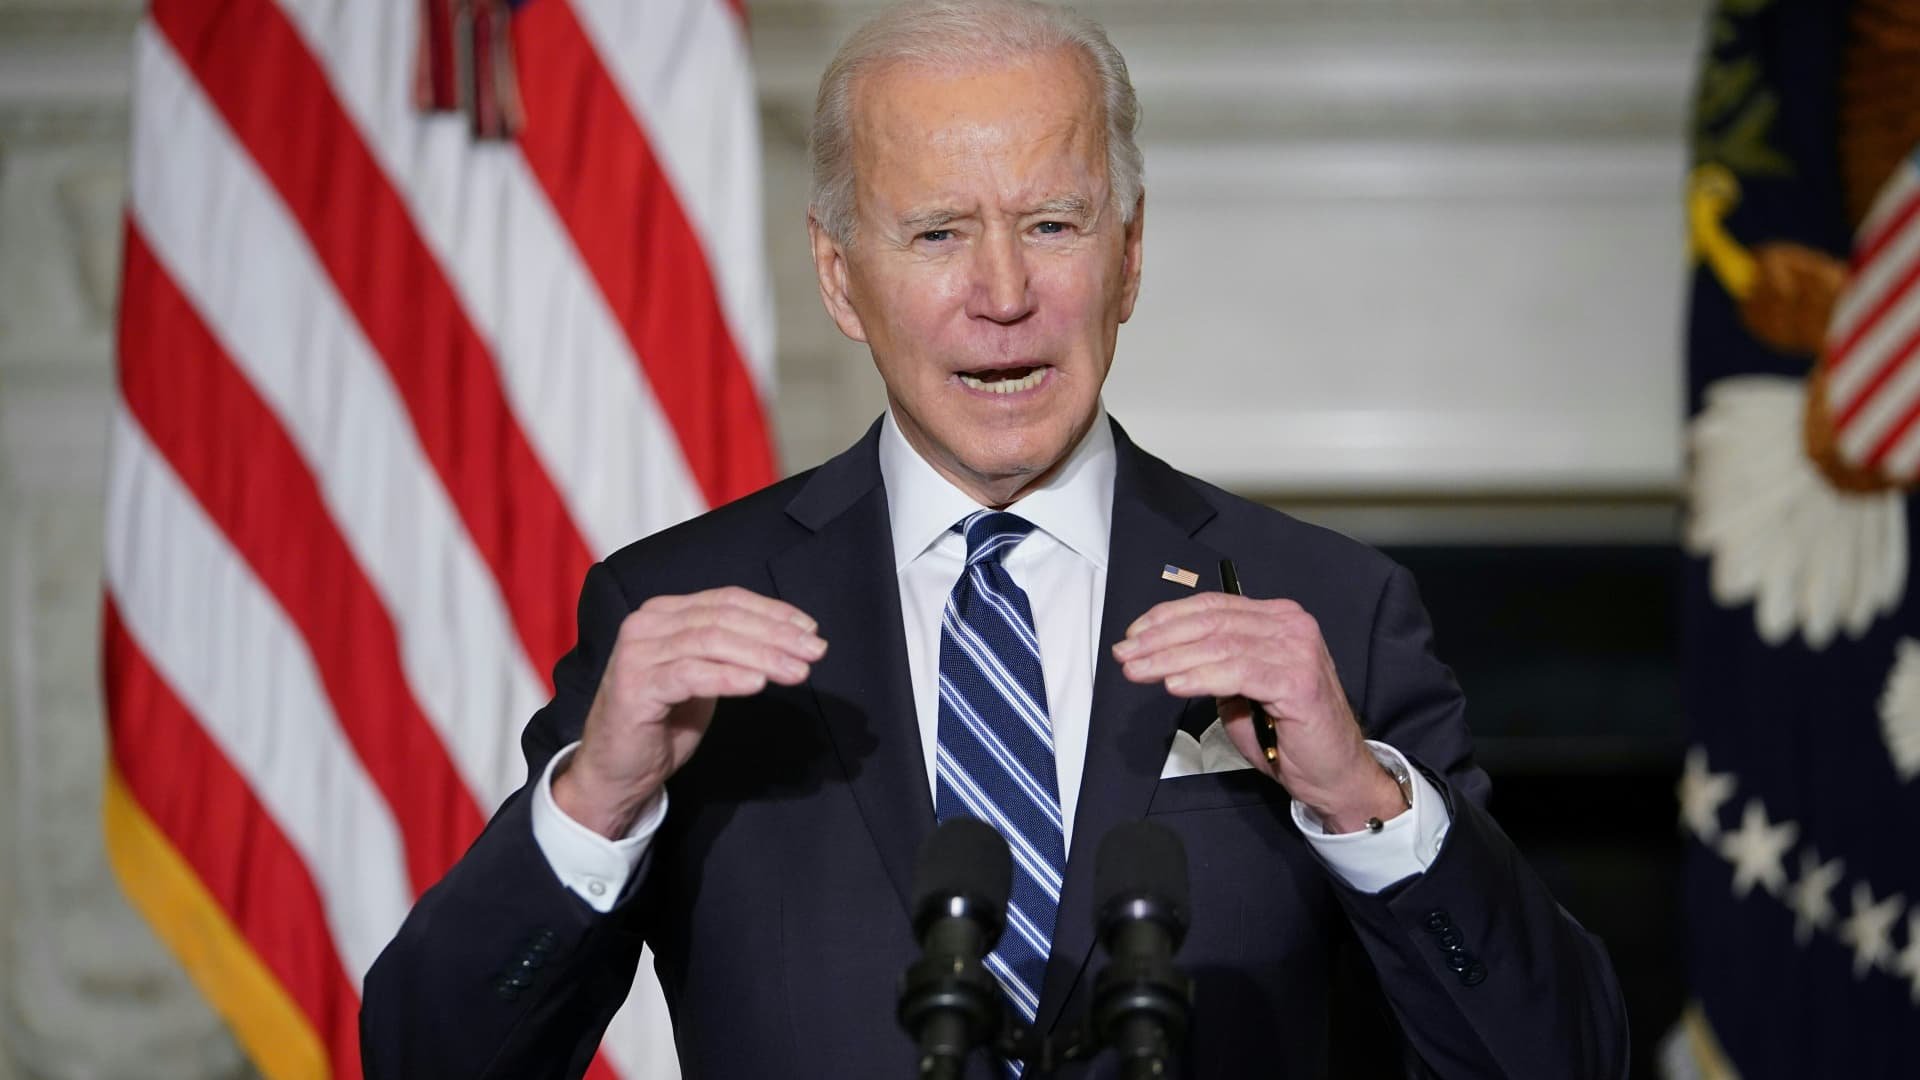 Biden suspends oil and gas leasing in slew of executive actions on climate change